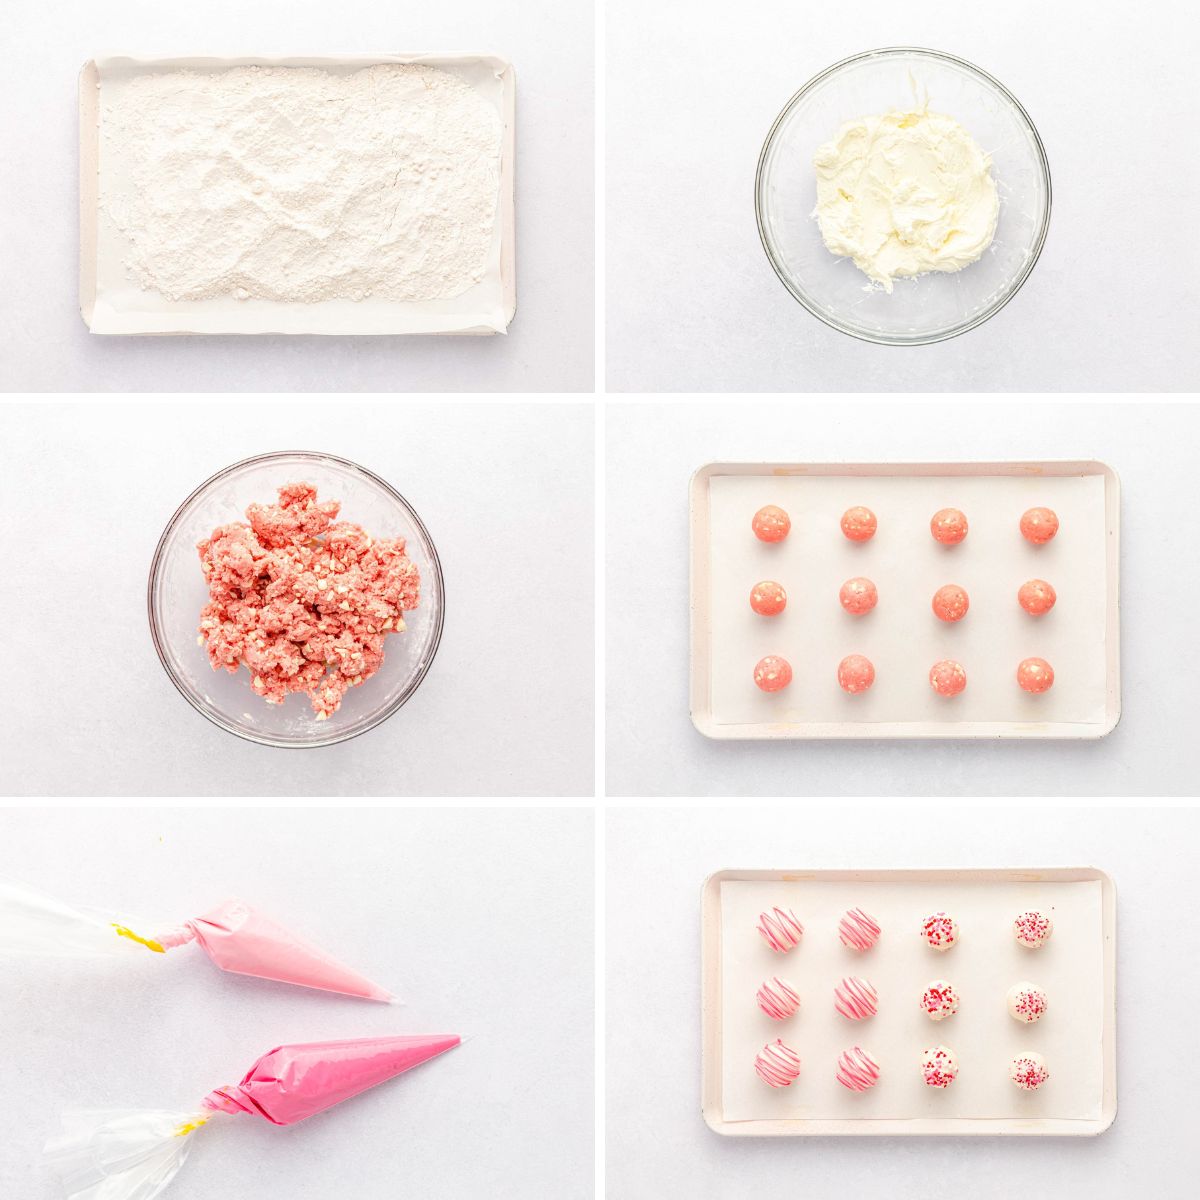 Step by step photo collage showing how to make strawberry cake balls.